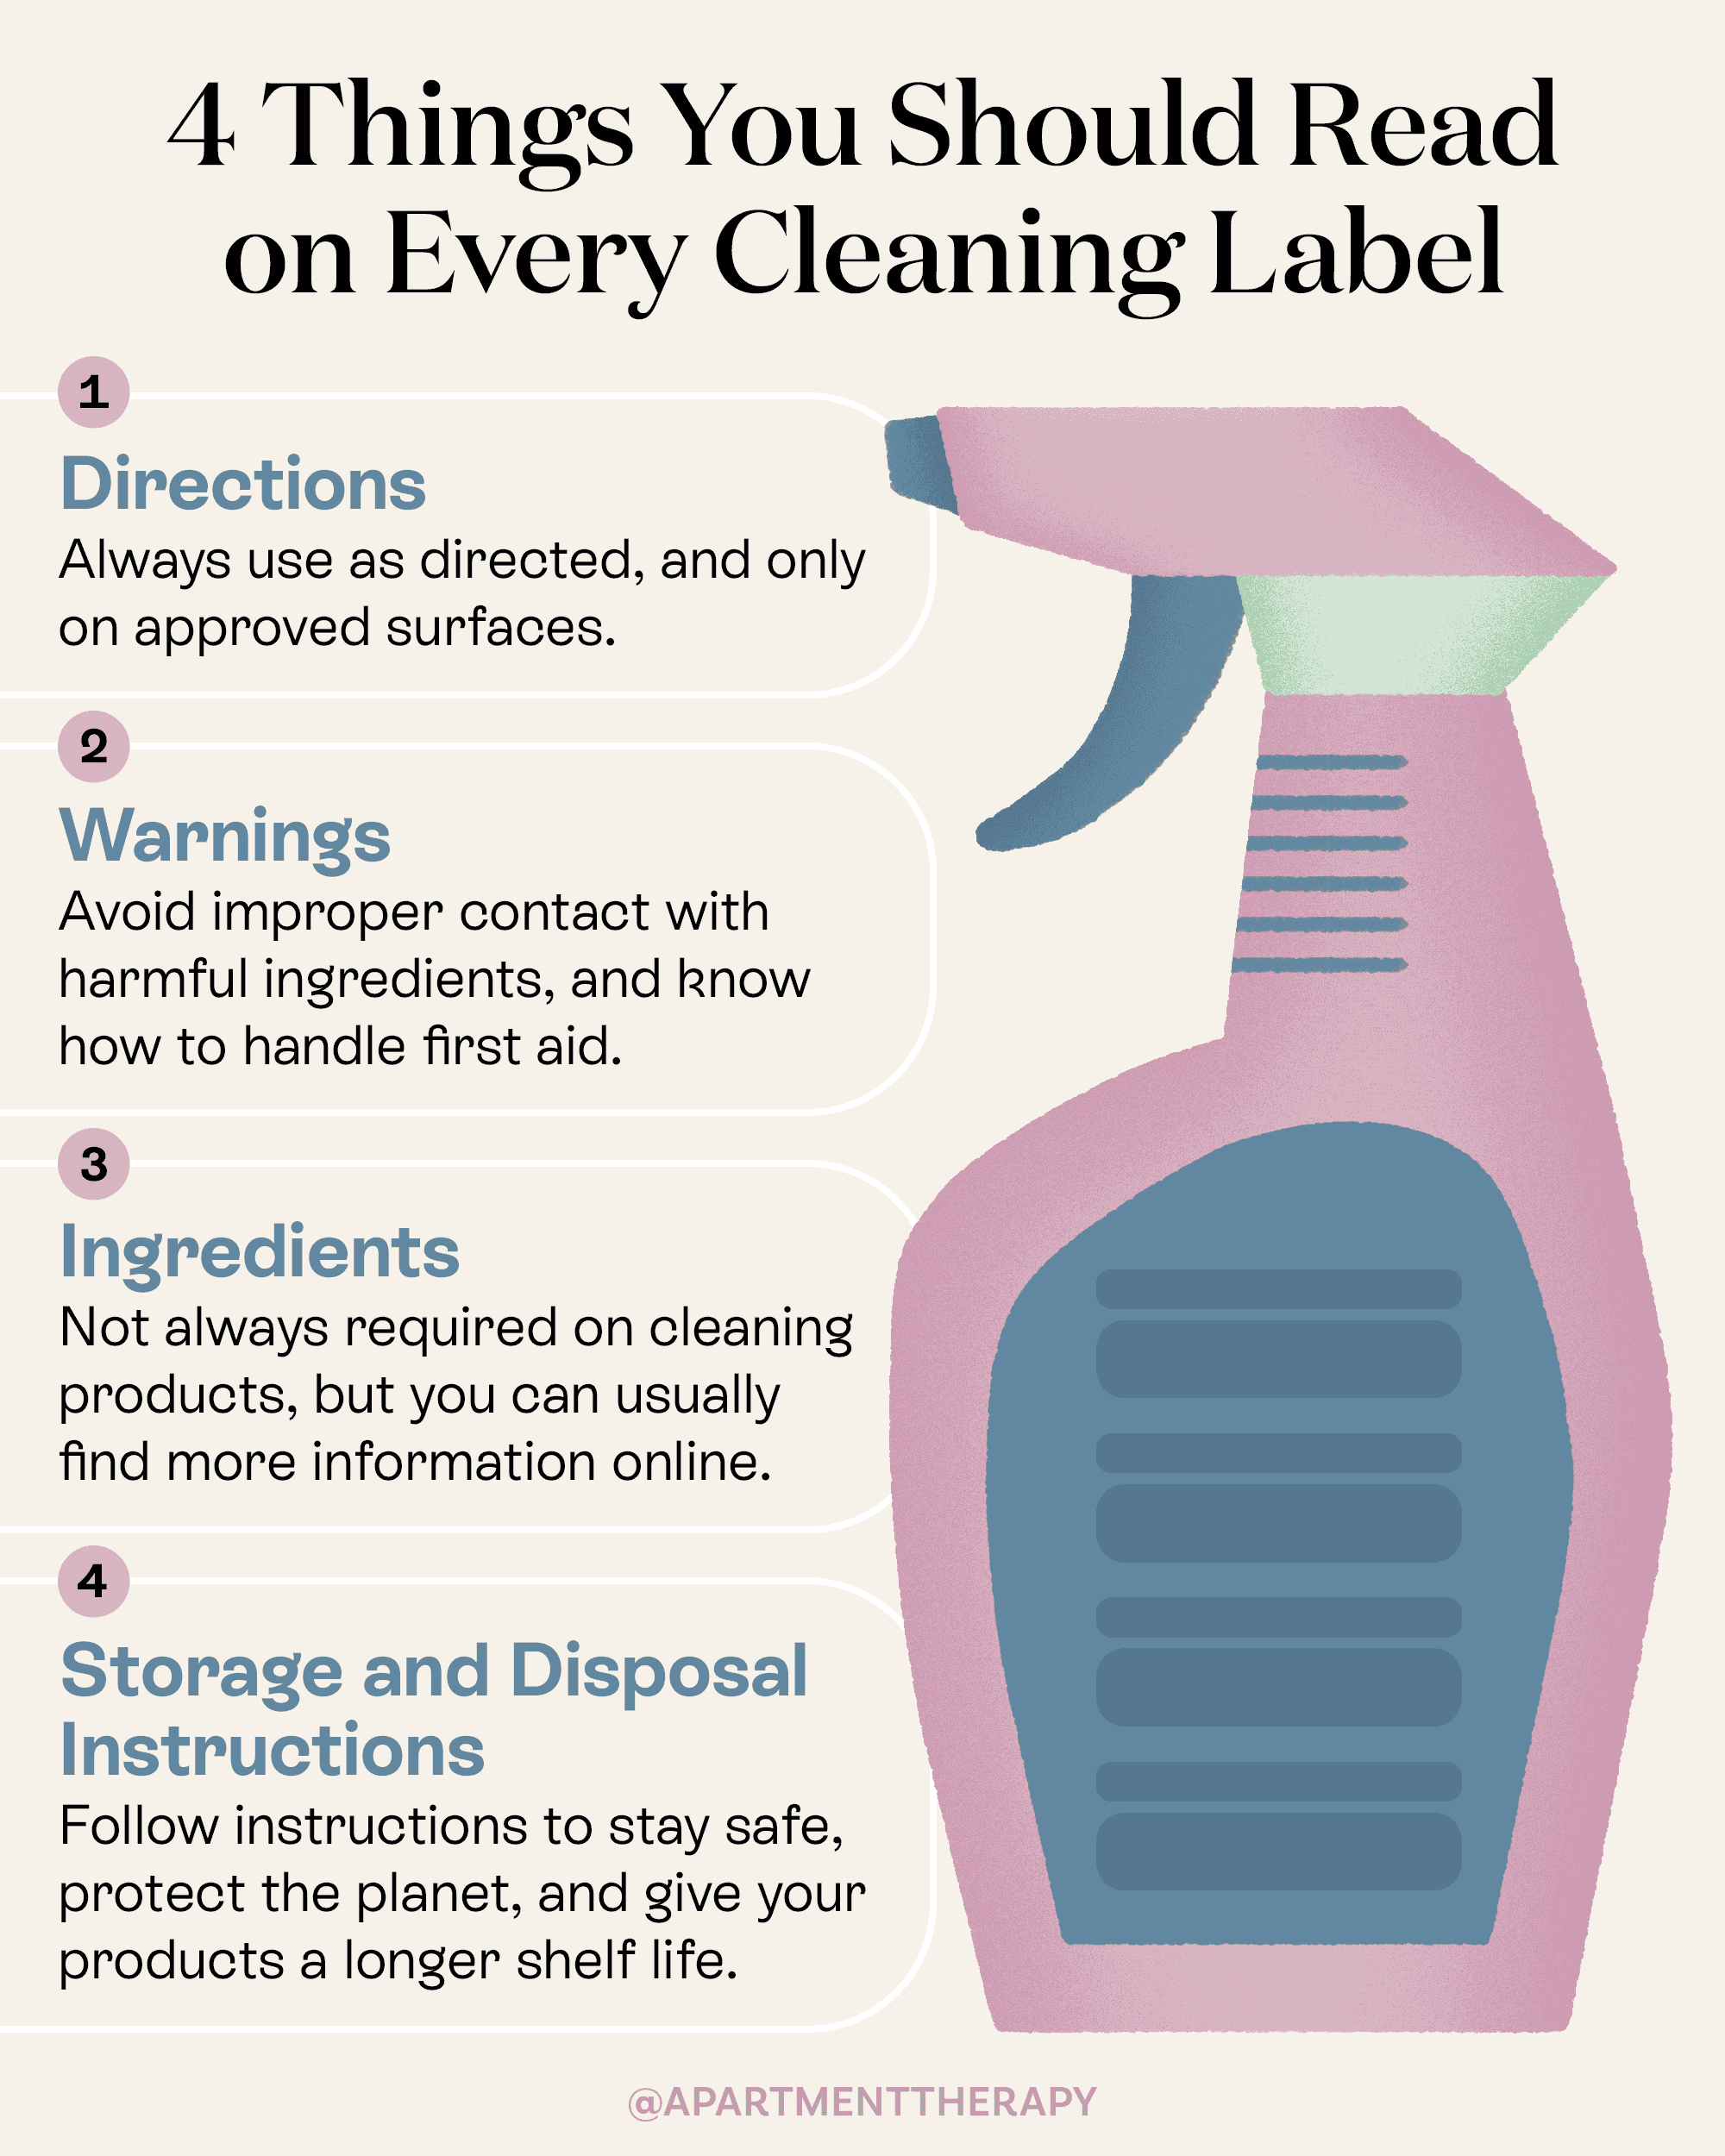 https://cdn.apartmenttherapy.info/image/upload/v1625767152/at/art/design/2021-07/Cleaning-Label-Infographic.png